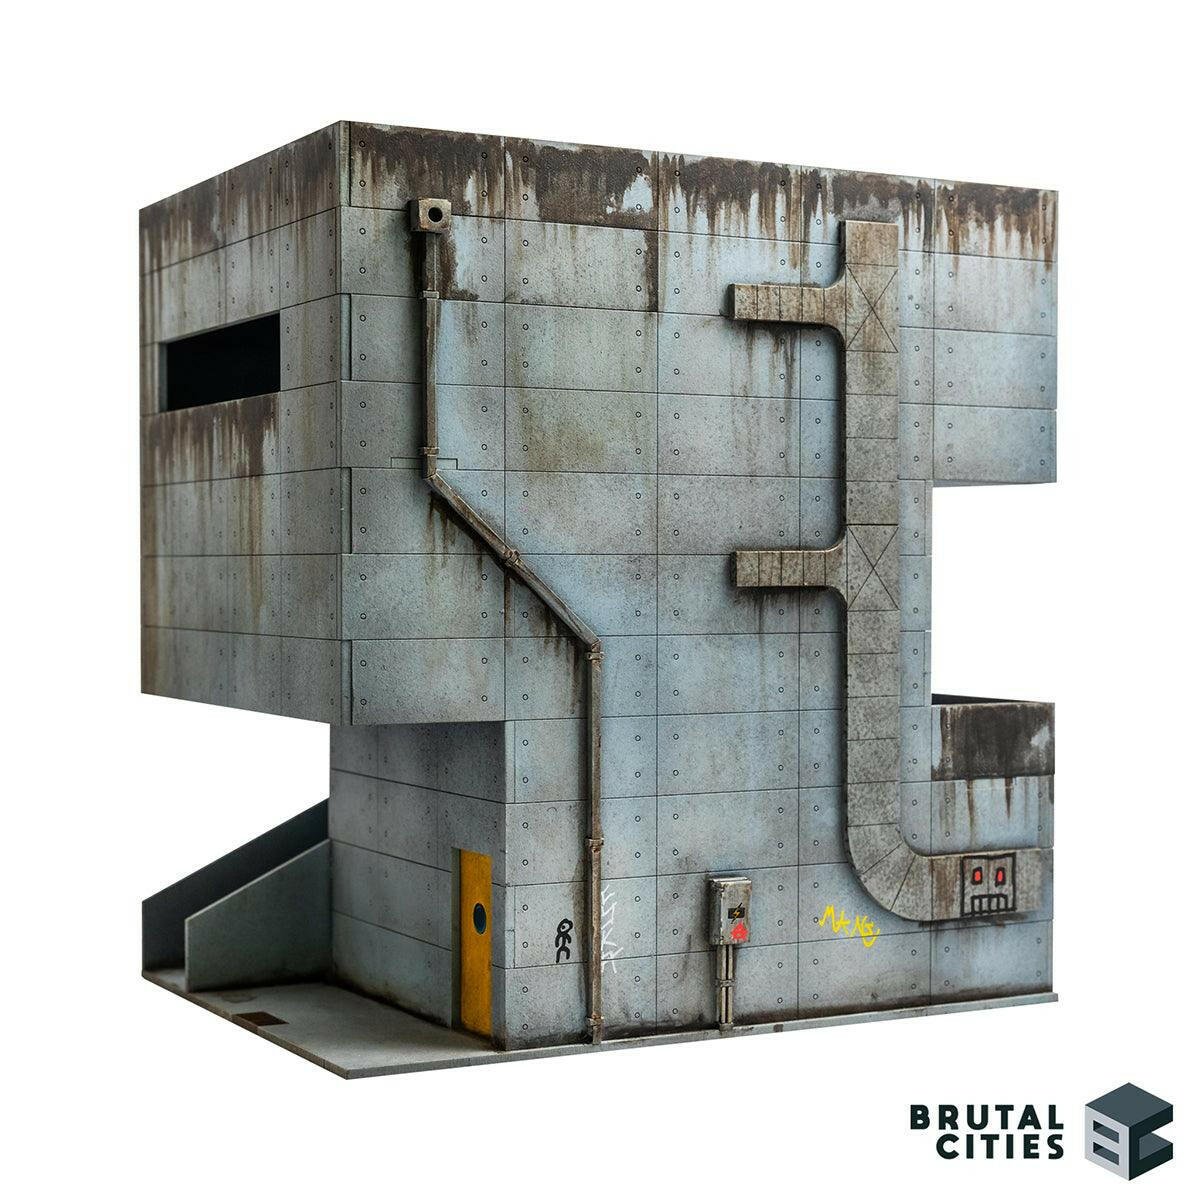 Concrete Brutalist 28mm tabletop terrain kit. Aircon ducting, downpipe and electrical conduit with a cyberpunk feel.